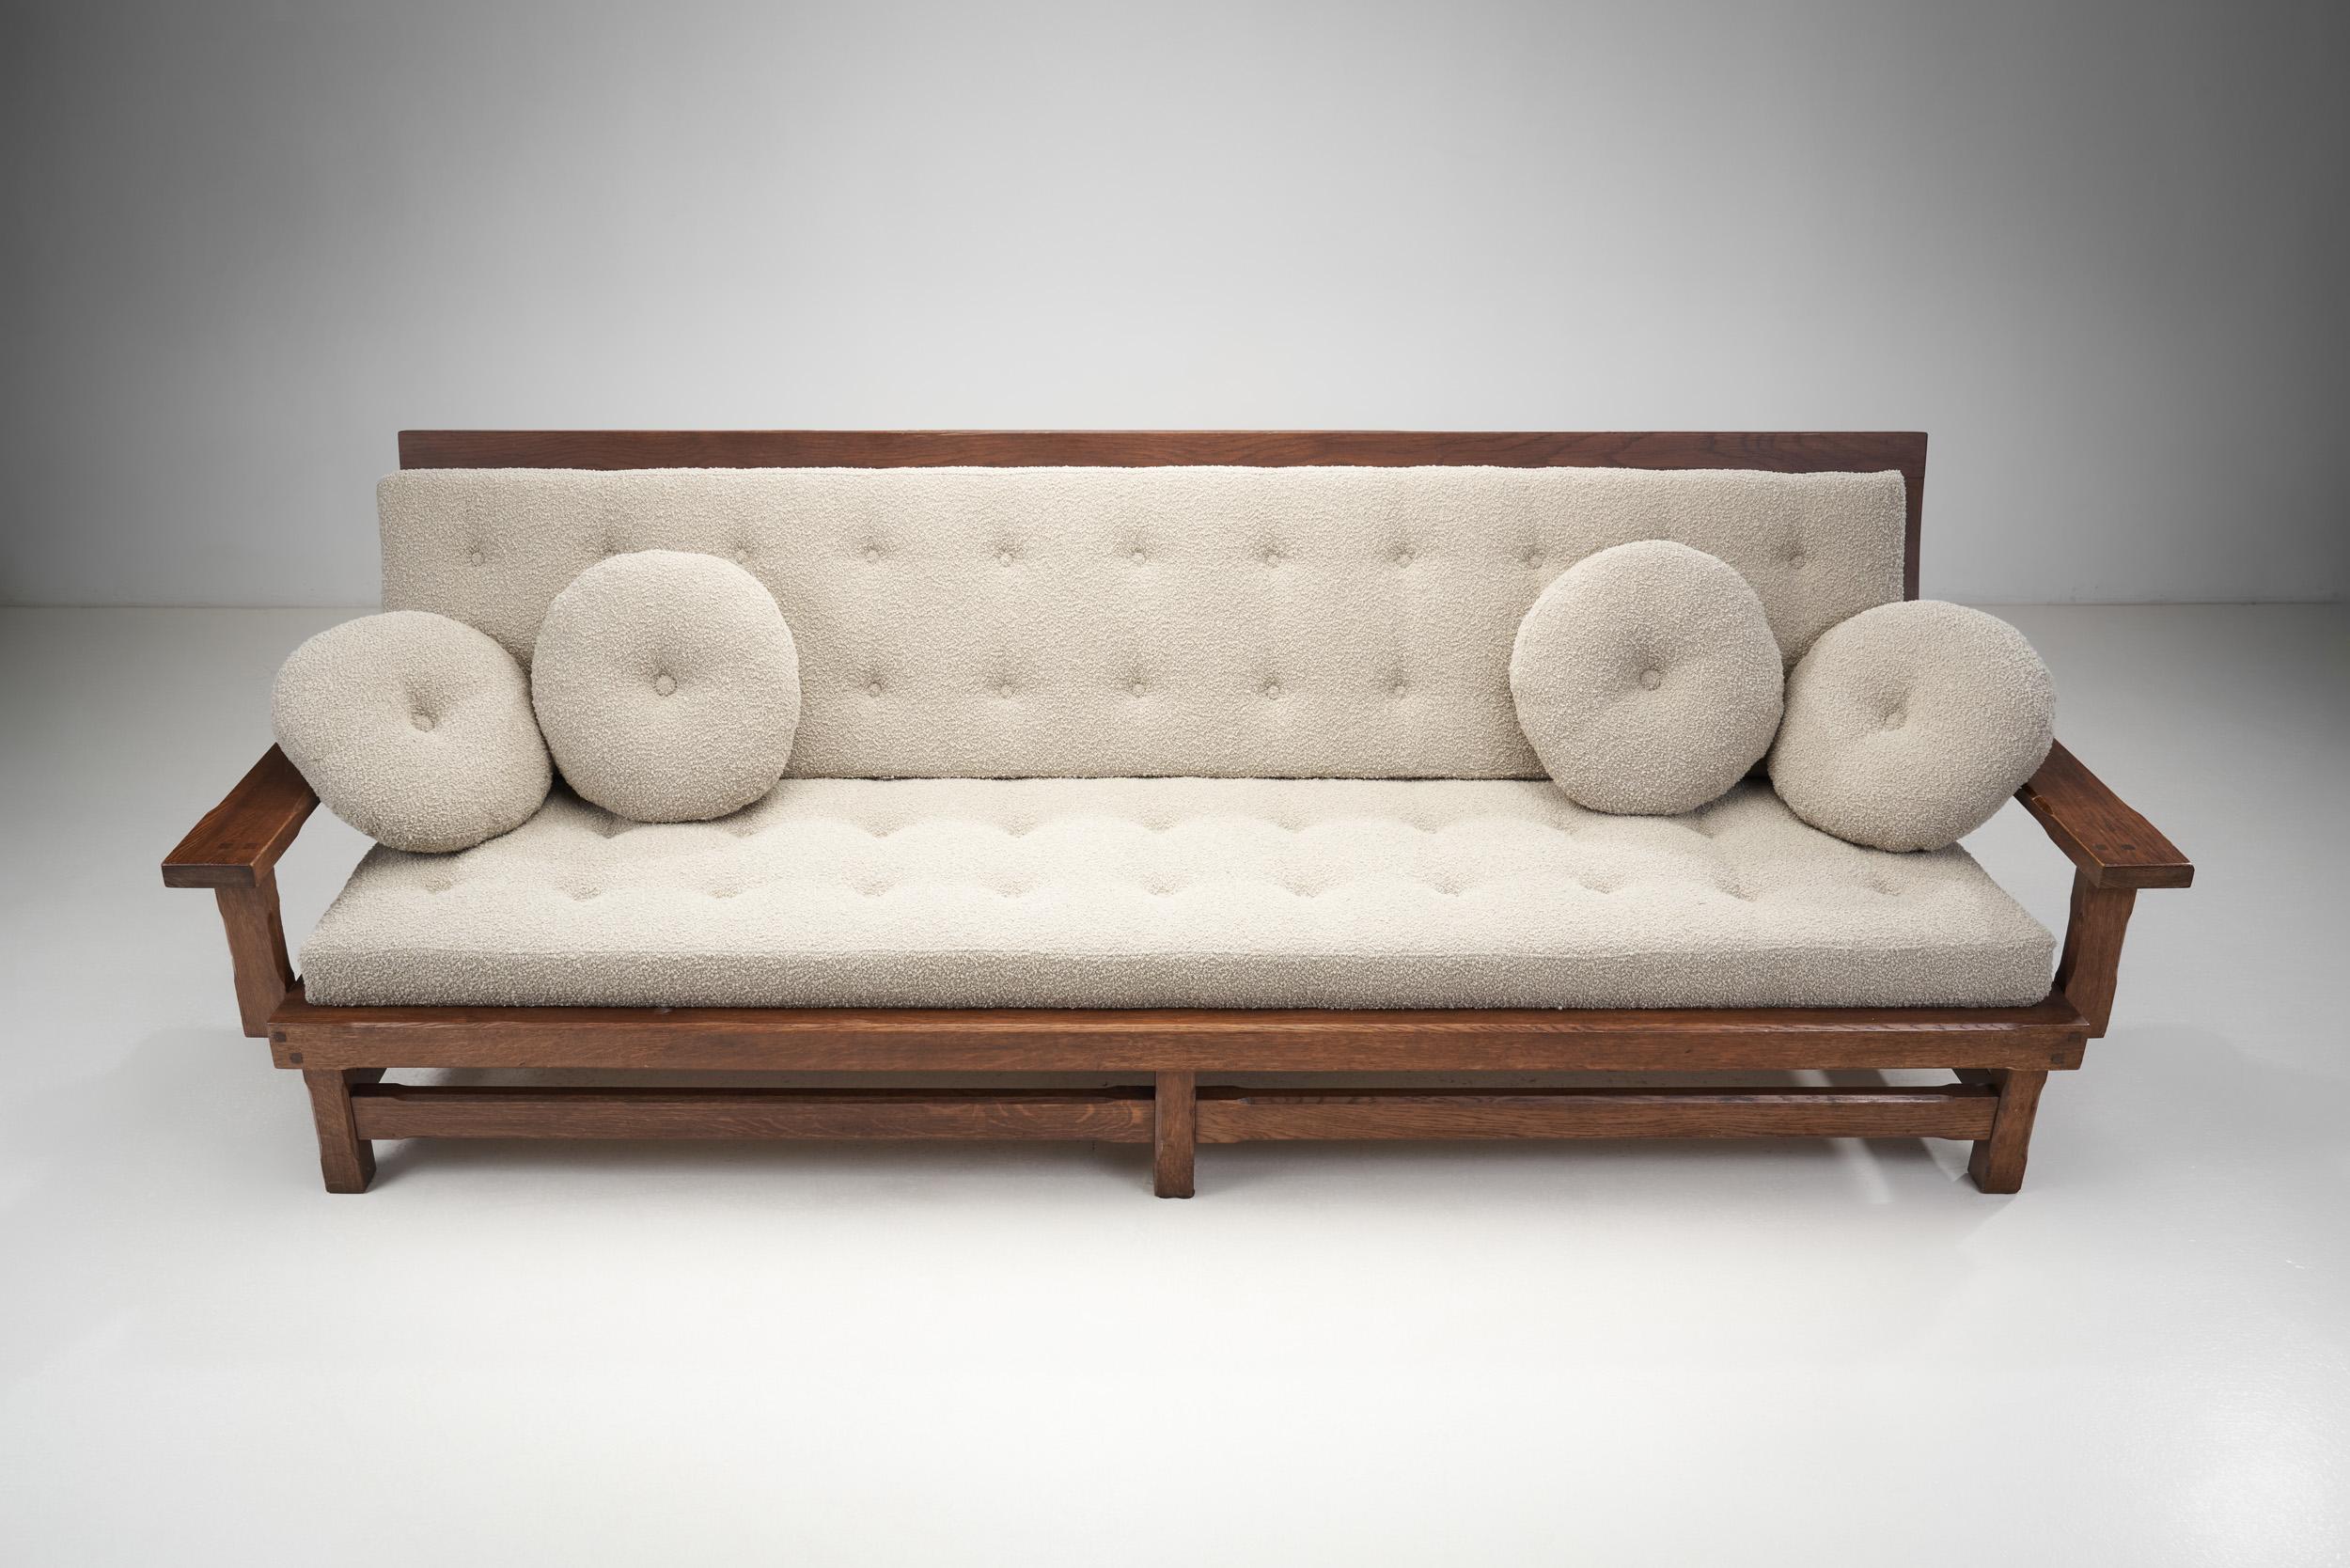 European Cabinetmaker Three-Seater Sofa with Bouclé Cushions, Europe circa 1950s For Sale 1